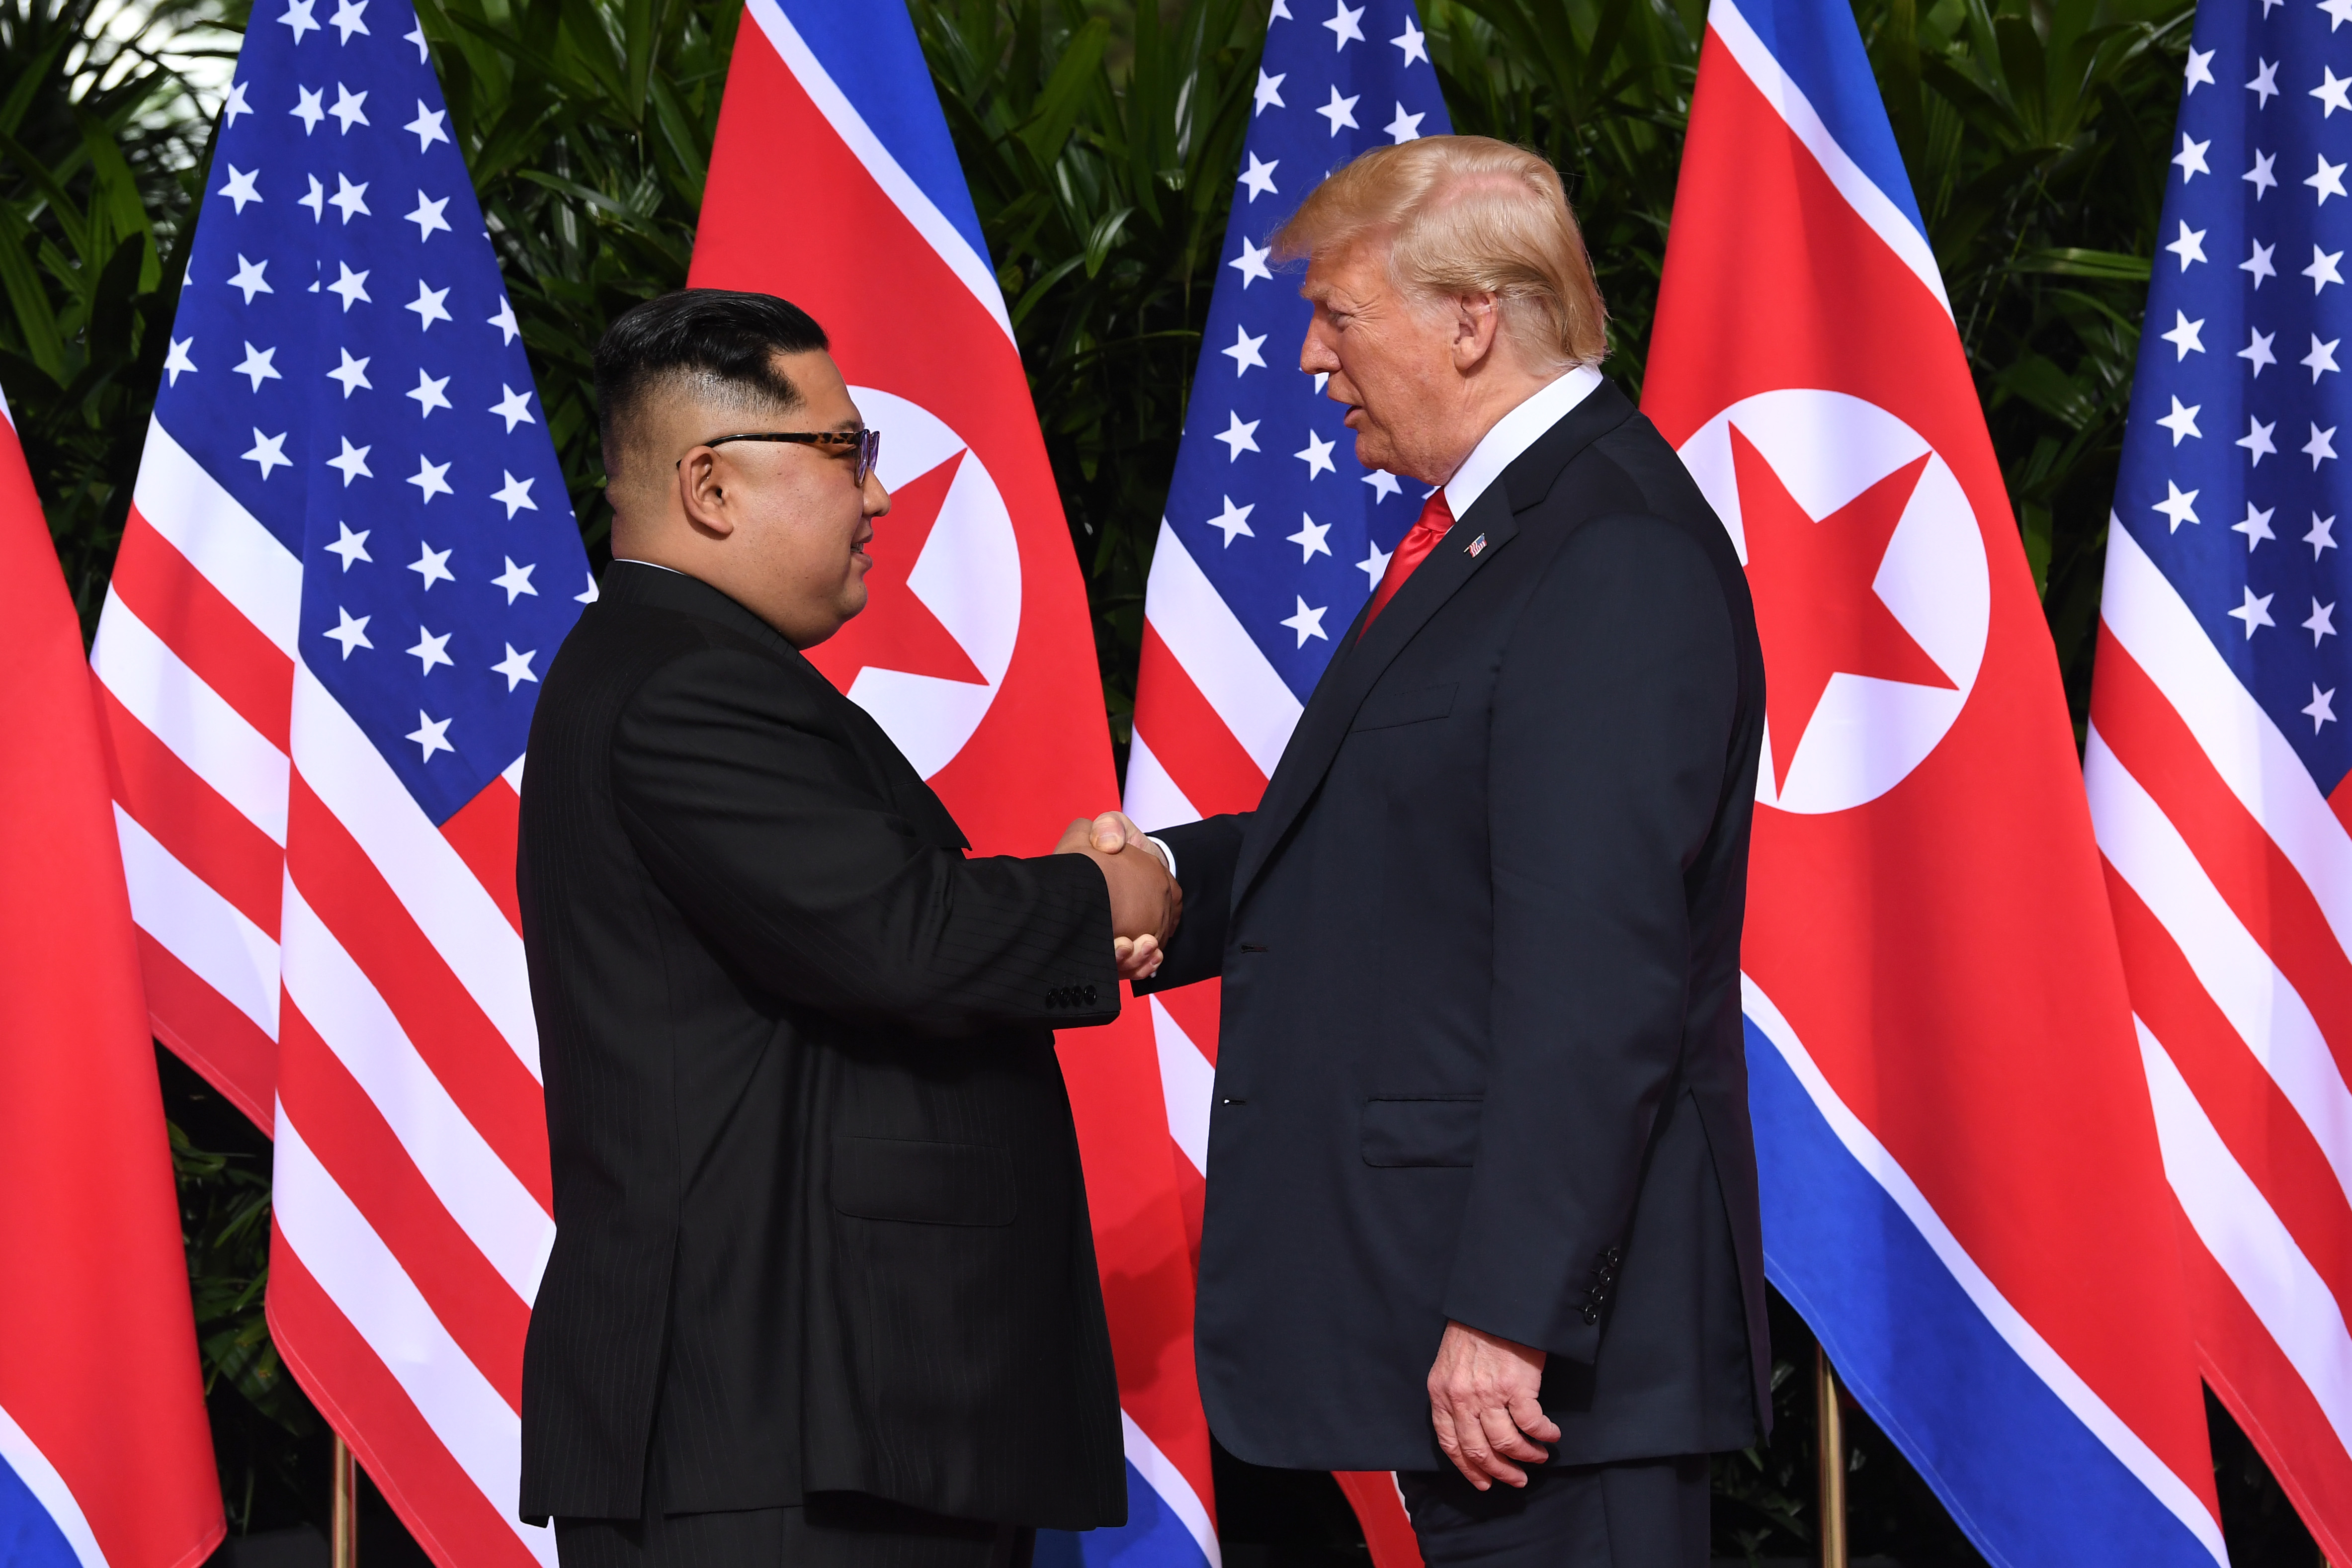 North Korea's leader Kim Jong Un shakes hands with President Donald Trump at the start of their historic U.S.-North Korea summit, at the Capella Hotel on Sentosa island in Singapore on June 12, 2018. (Saul Loeb—AFP/Getty Images)